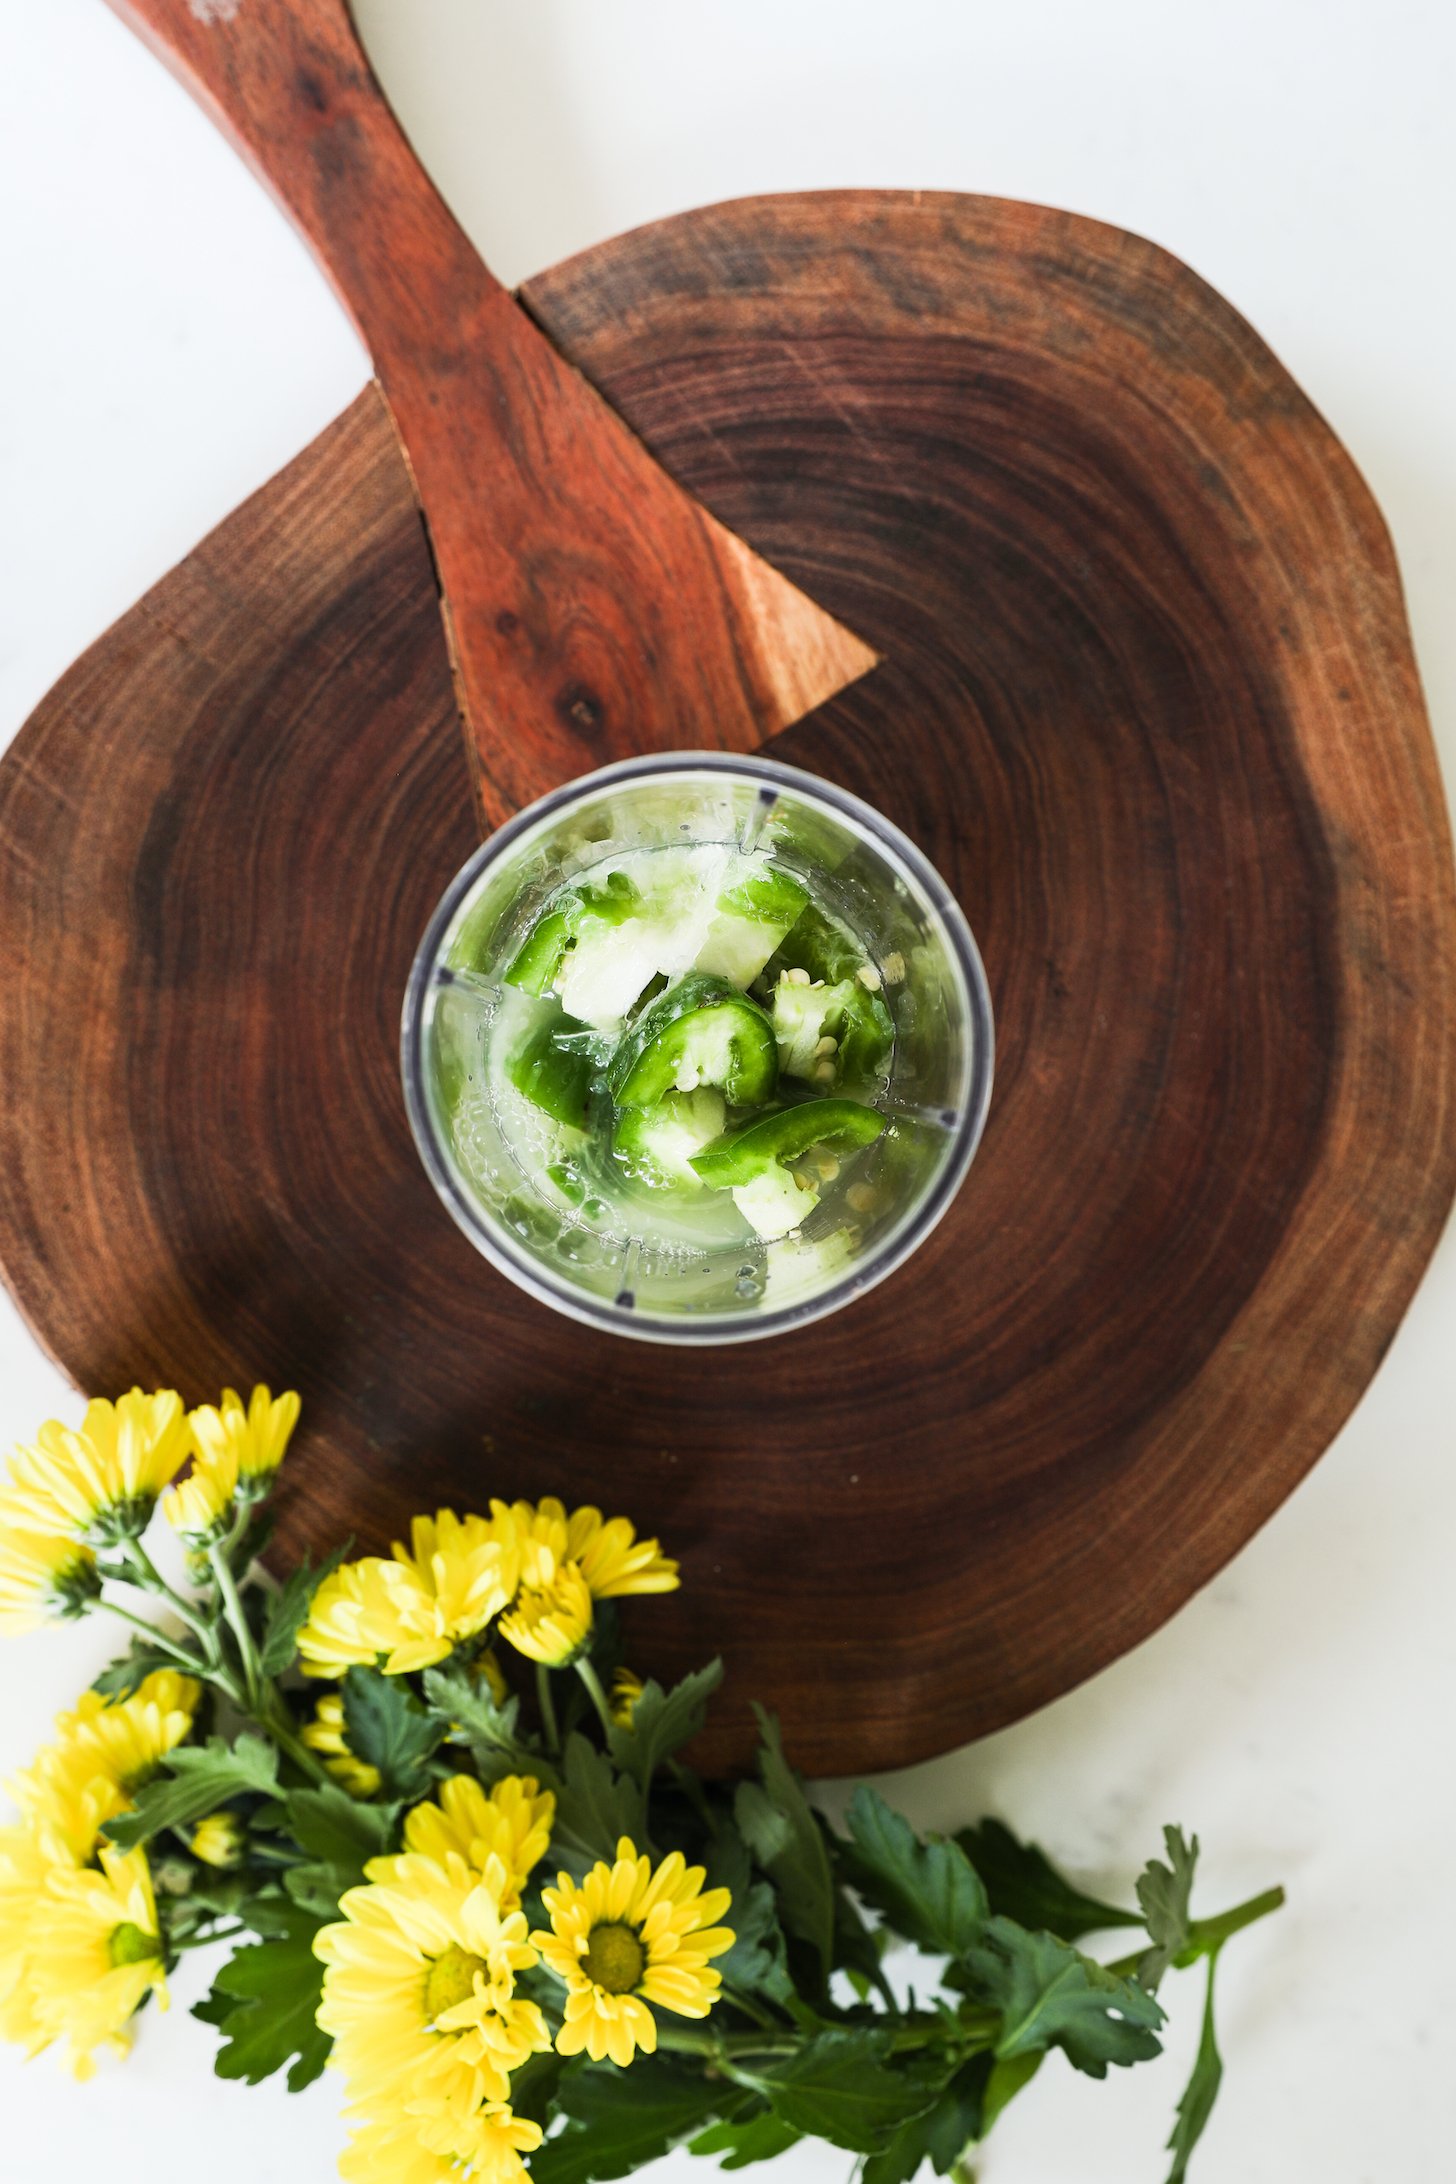 Top view of a small blender filled with chopped jalapeno and lime juice on a wooden board with yellow flowers nearby.